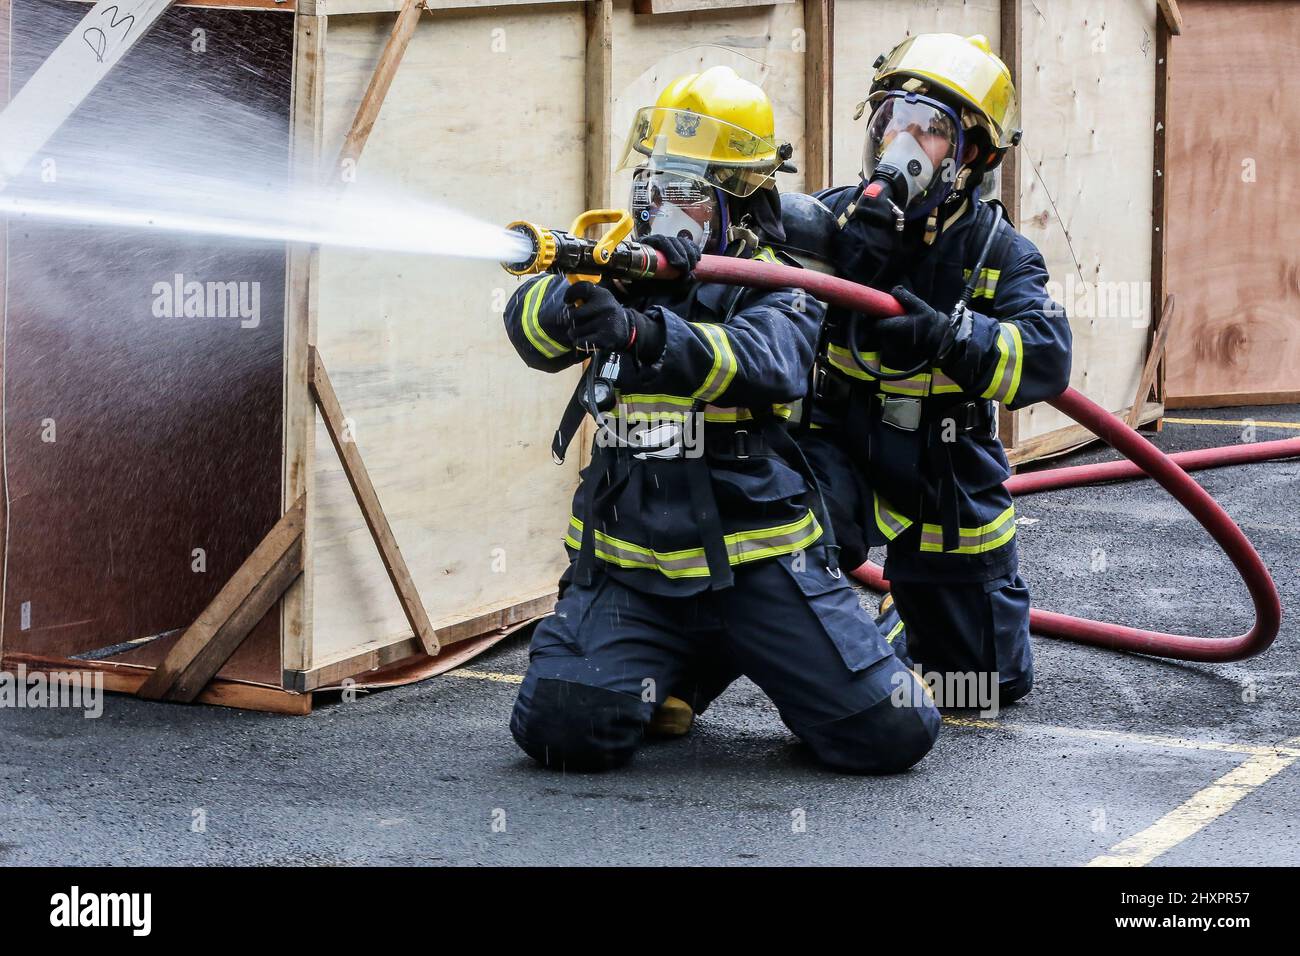 Quezon City. 14th Mar, 2022. Female firefighters participate in the Women Firefighters Skills Olympics at the Philippine Bureau of Fire Protection-National Capital Region (BFP-NCR) headquarters in Quezon City, the Philippines on March 14, 2022. The Philippine Bureau of Fire Protection (BFP) held its Women Firefighters Skills Olympics as part of the observance of the National Women's Month and the Fire Prevention Month to show the skills of their female personnel in extinguishing fires, emergency response, and rescue capabilities. Credit: Rouelle Umali/Xinhua/Alamy Live News Stock Photo